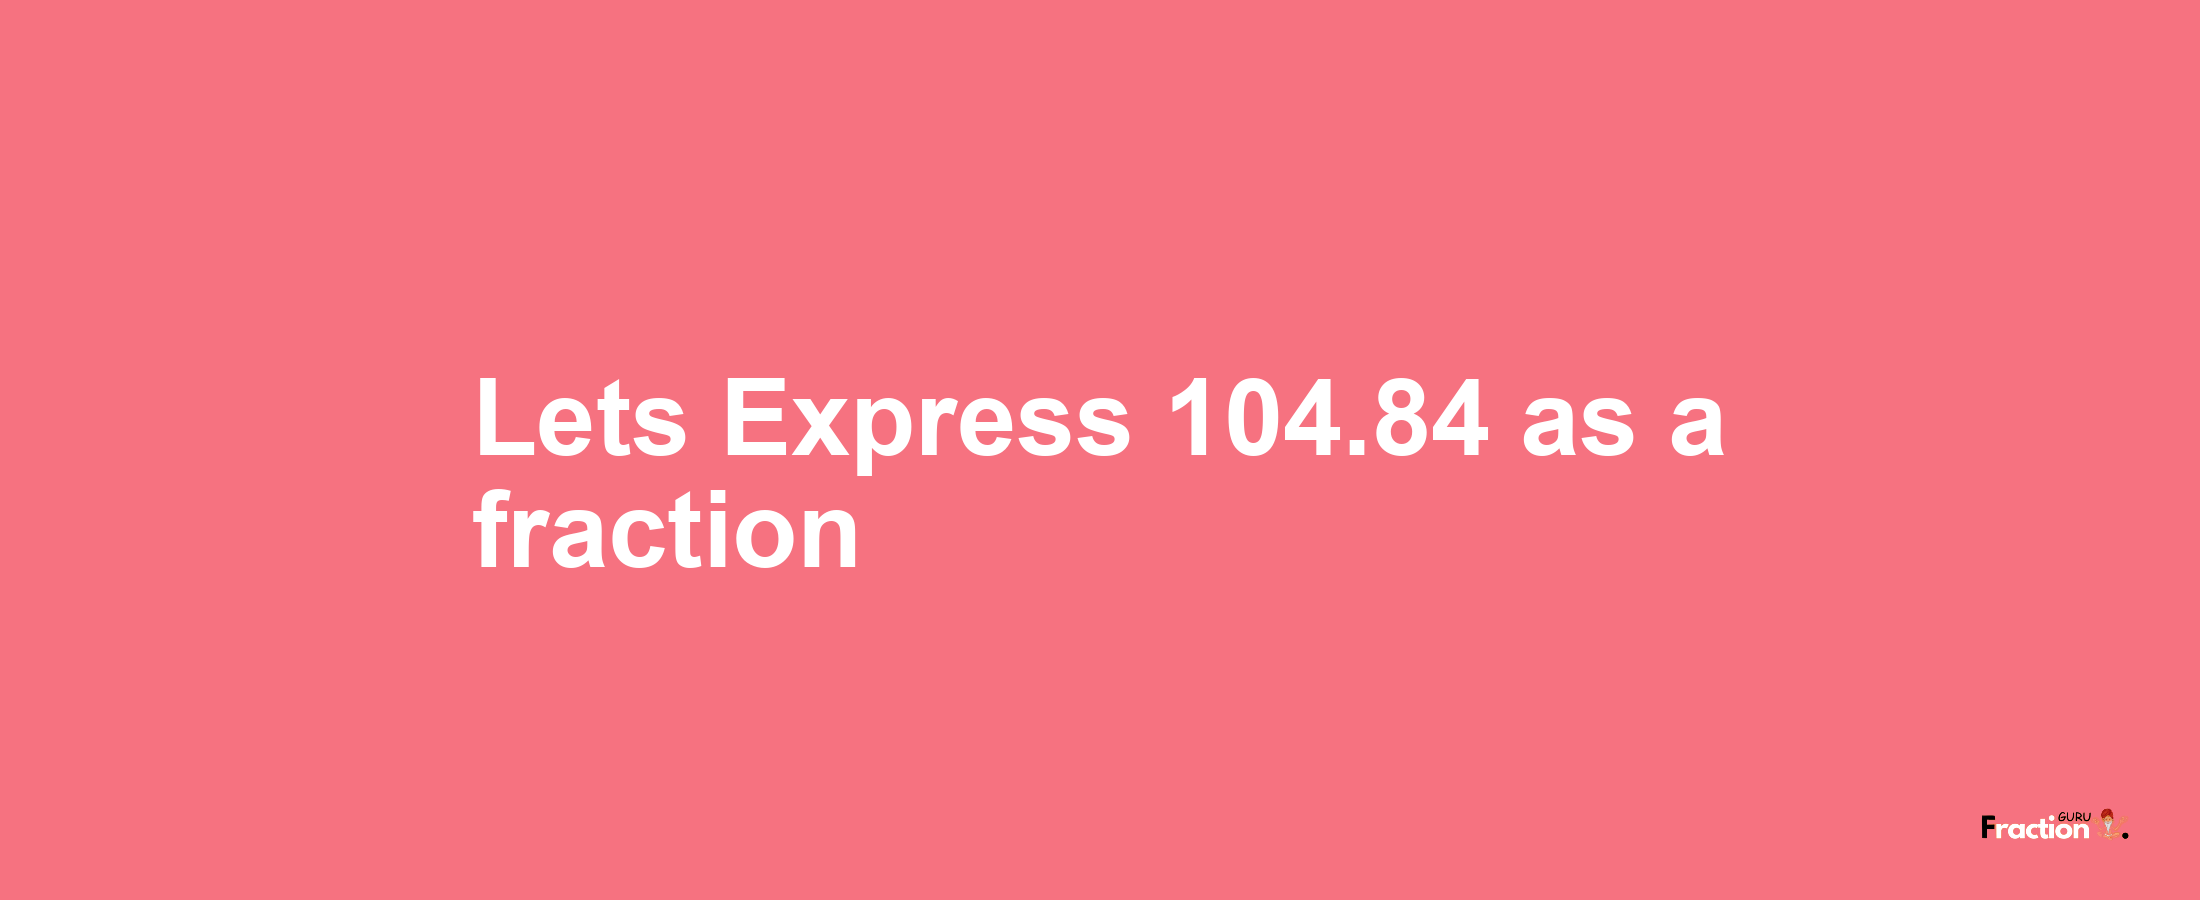 Lets Express 104.84 as afraction